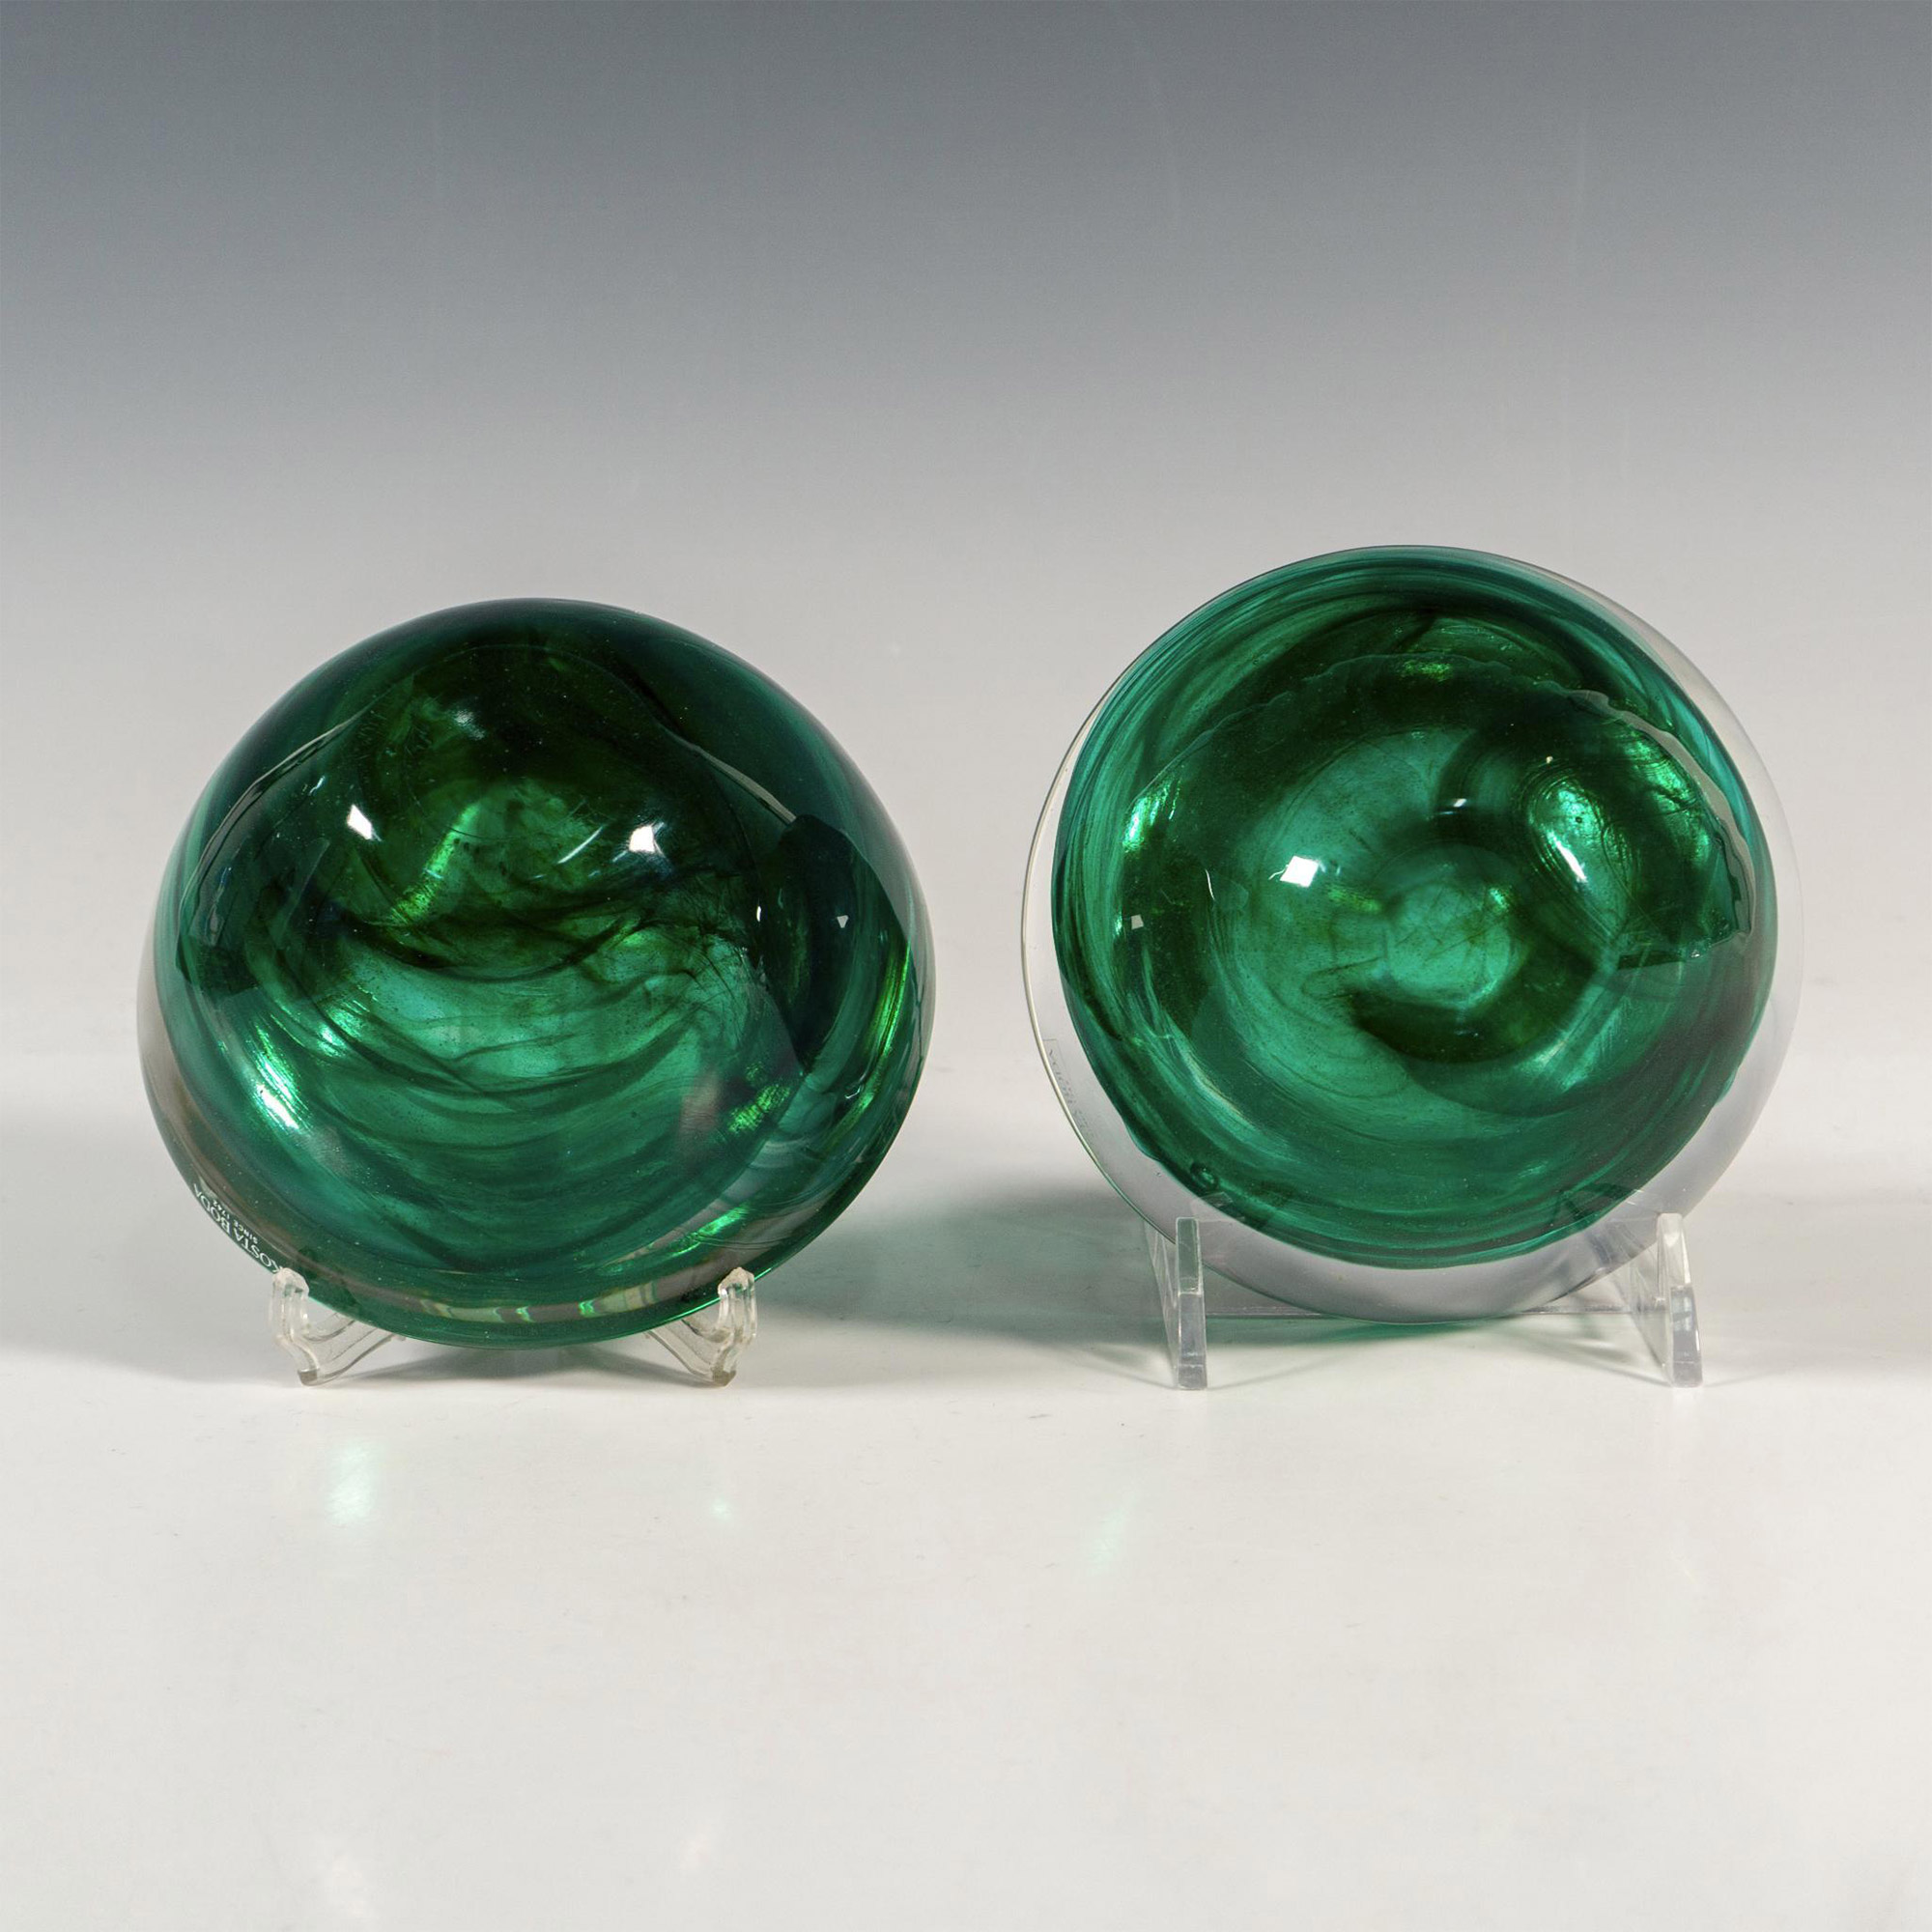 Pair of Kosta Boda by Anna Ehrner Candle Holders, Atoll - Image 5 of 5